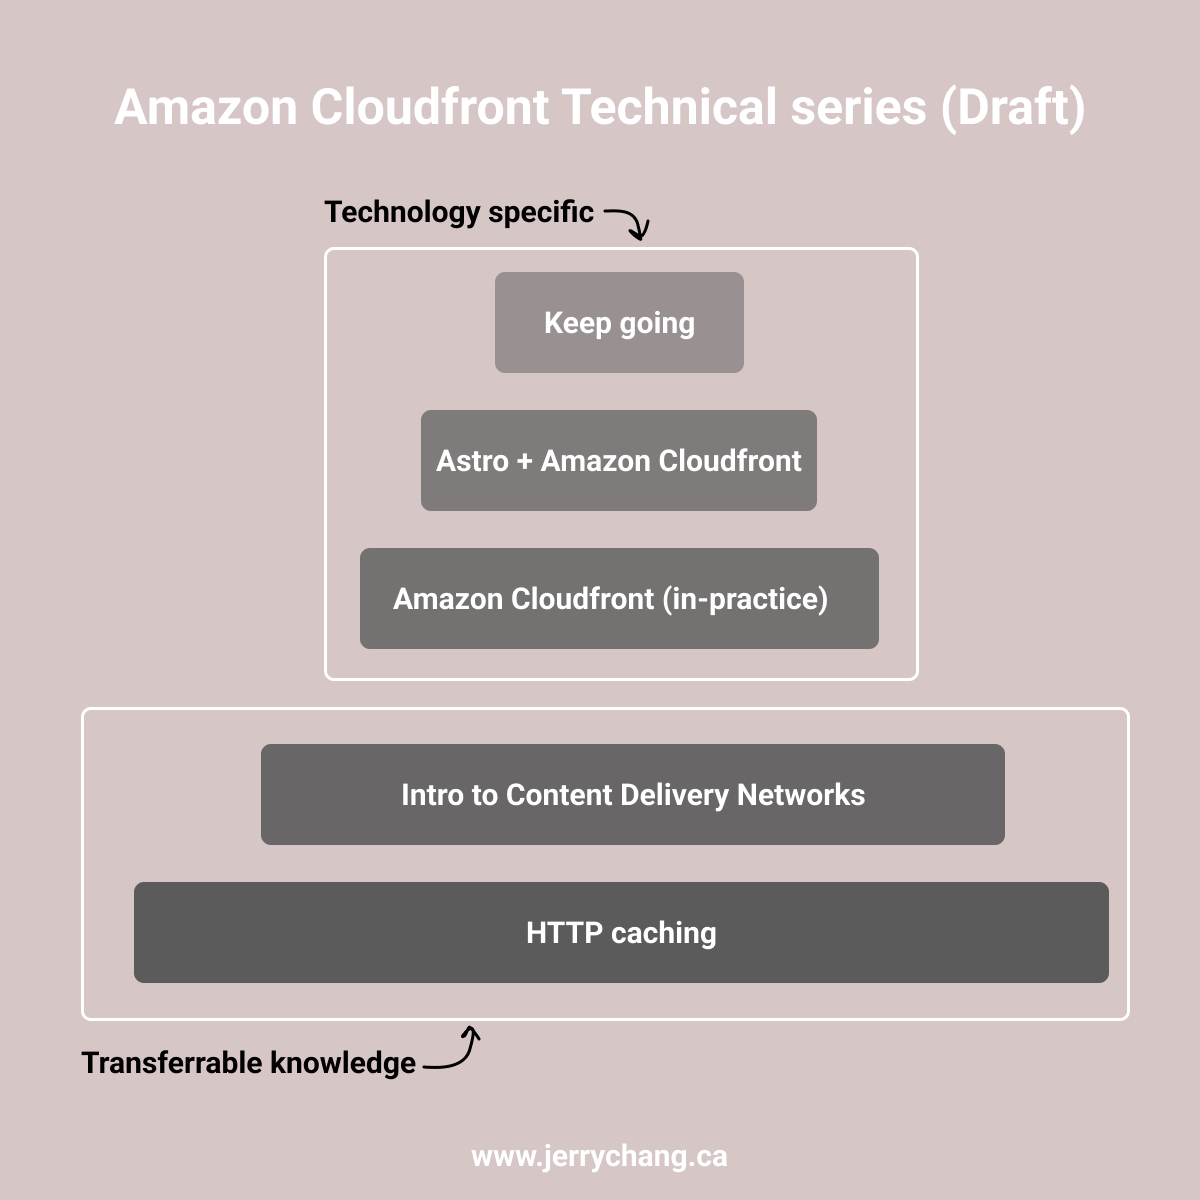 Amazon Cloudfront technical series learning pyramid